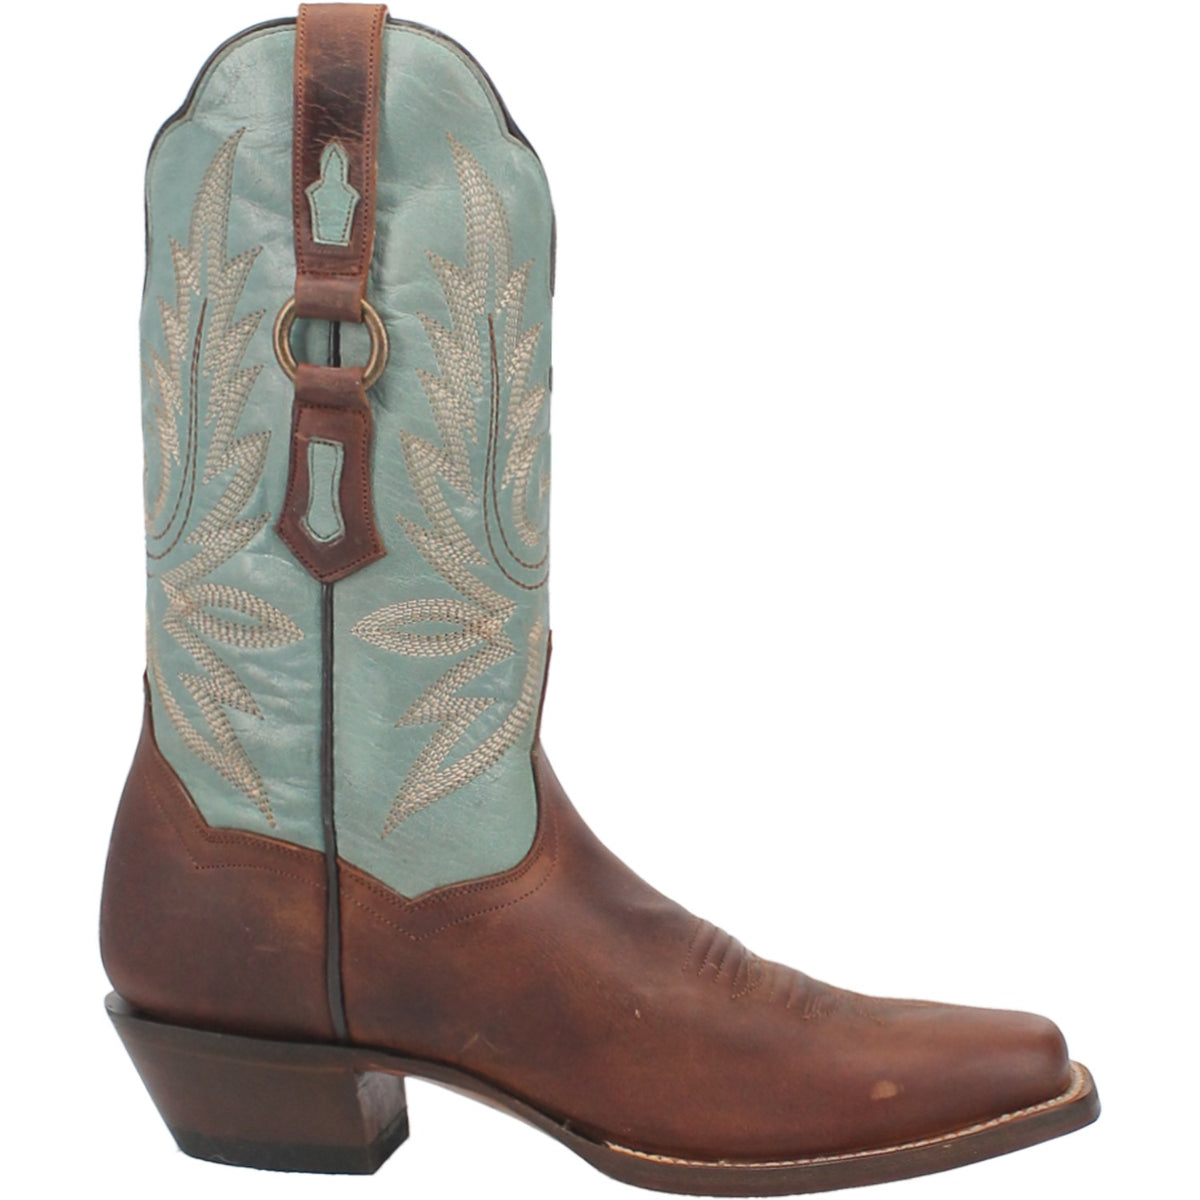 TAMRA LEATHER BOOT Cover